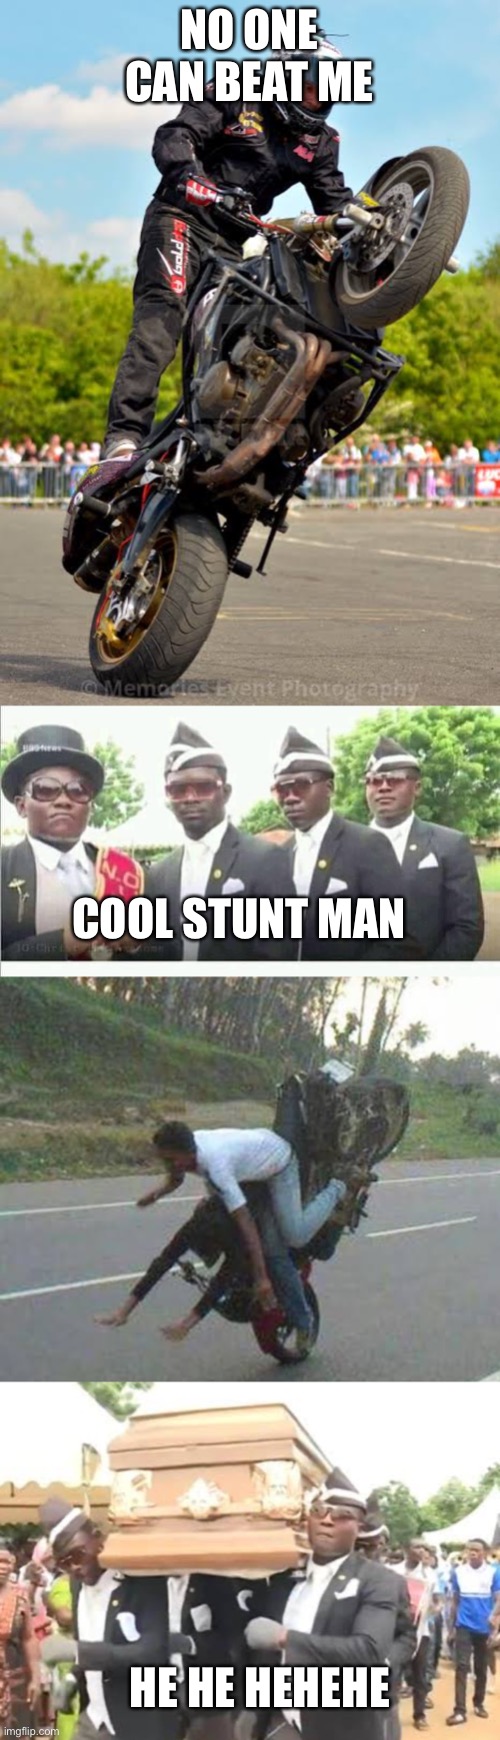 NO ONE CAN BEAT ME; COOL STUNT MAN; HE HE HEHEHE | image tagged in coffin dance | made w/ Imgflip meme maker